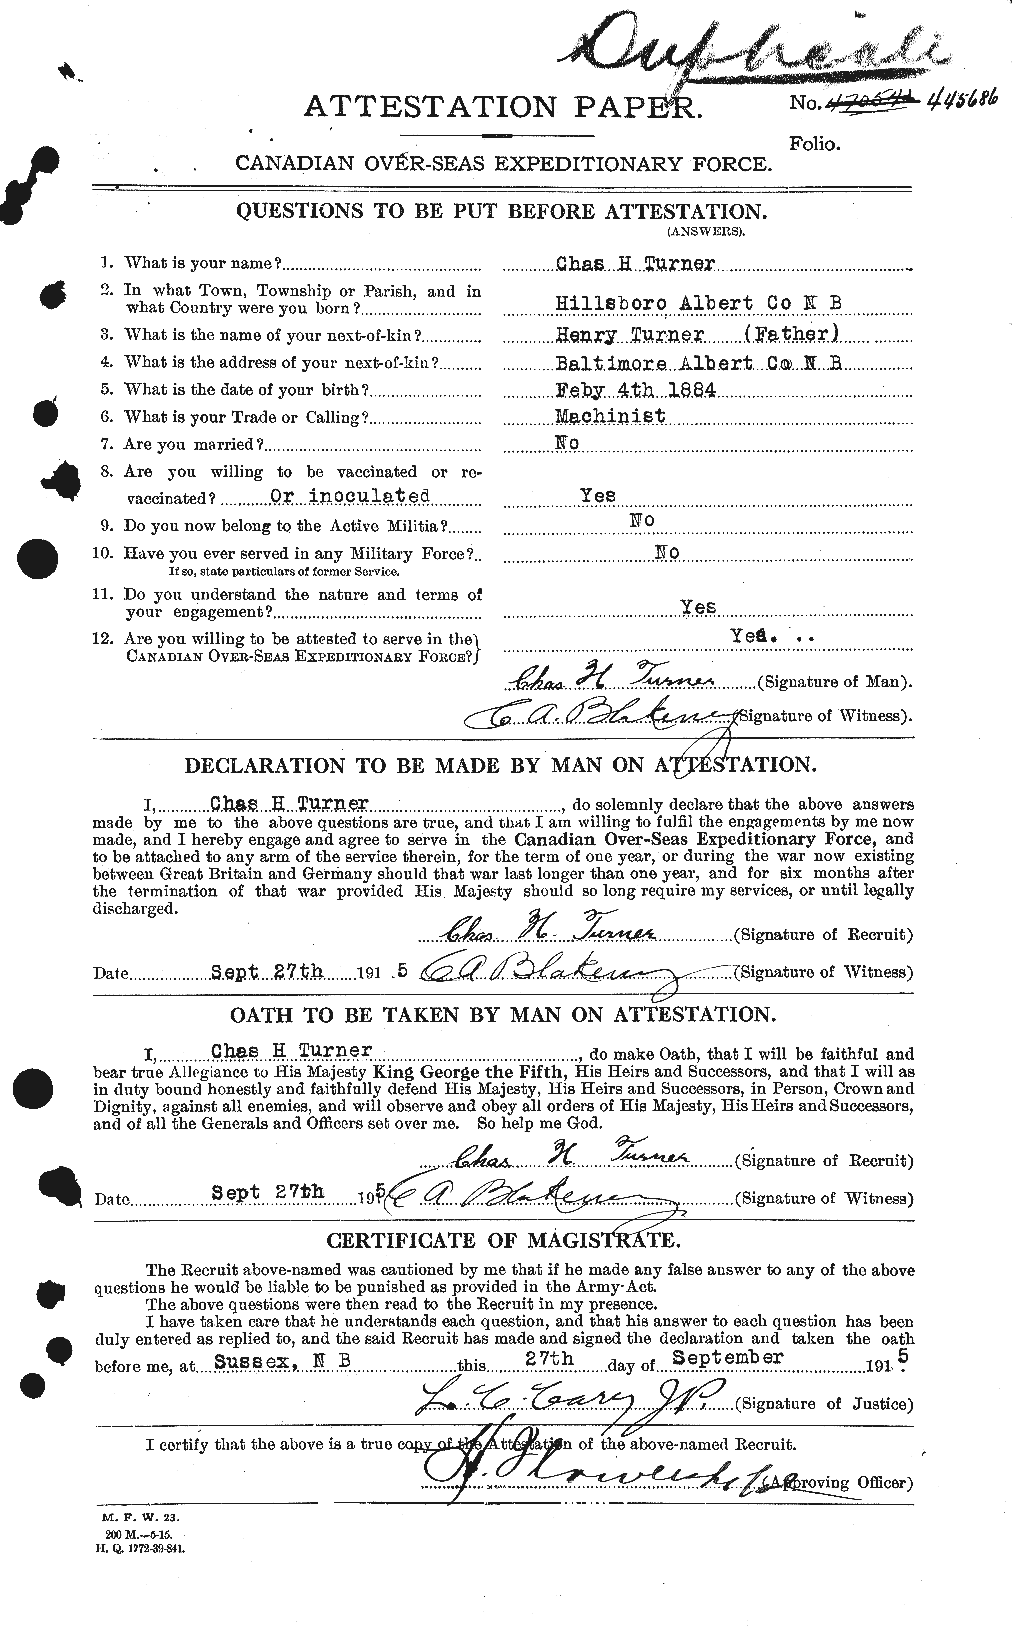 Personnel Records of the First World War - CEF 646373a